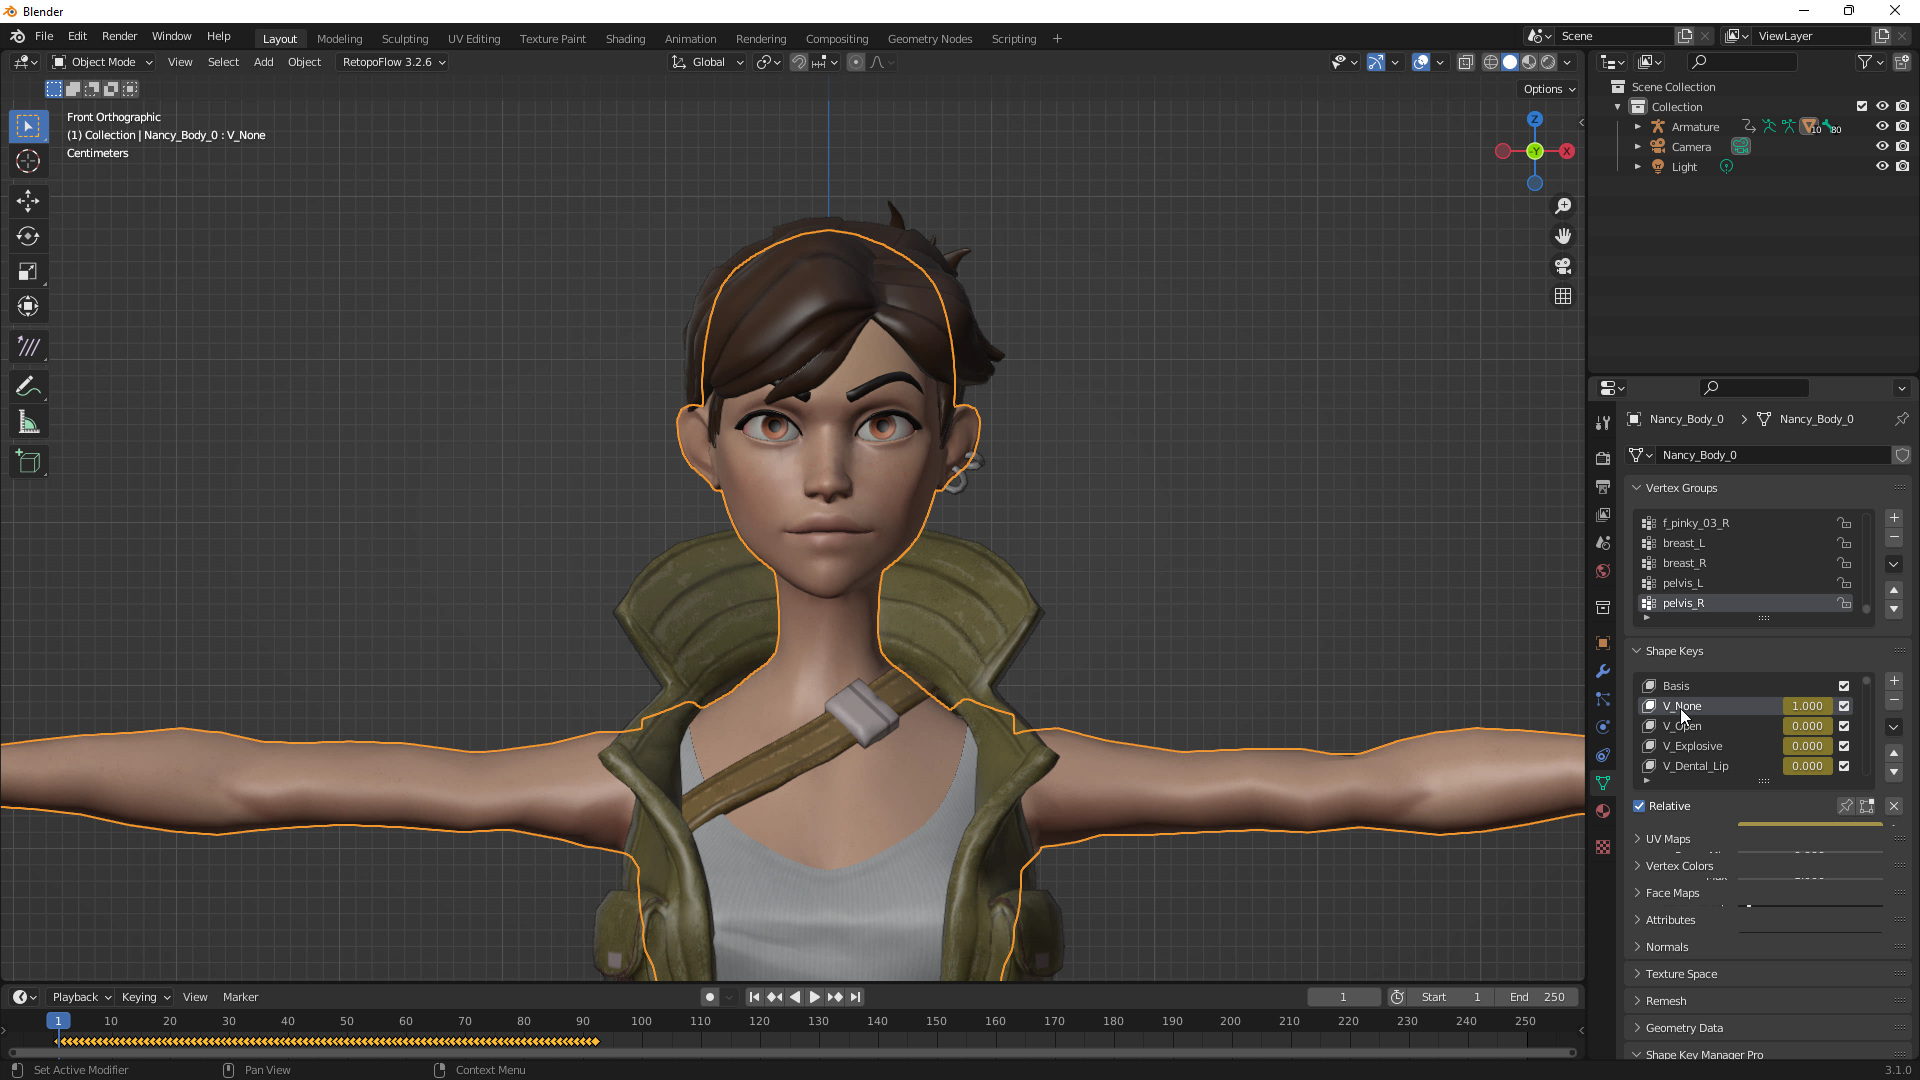 Fastest way from Static Mesh to Fully Animated Character : Blender to  Character Creator 4 - Humanoid Pipeline [$] - BlenderNation